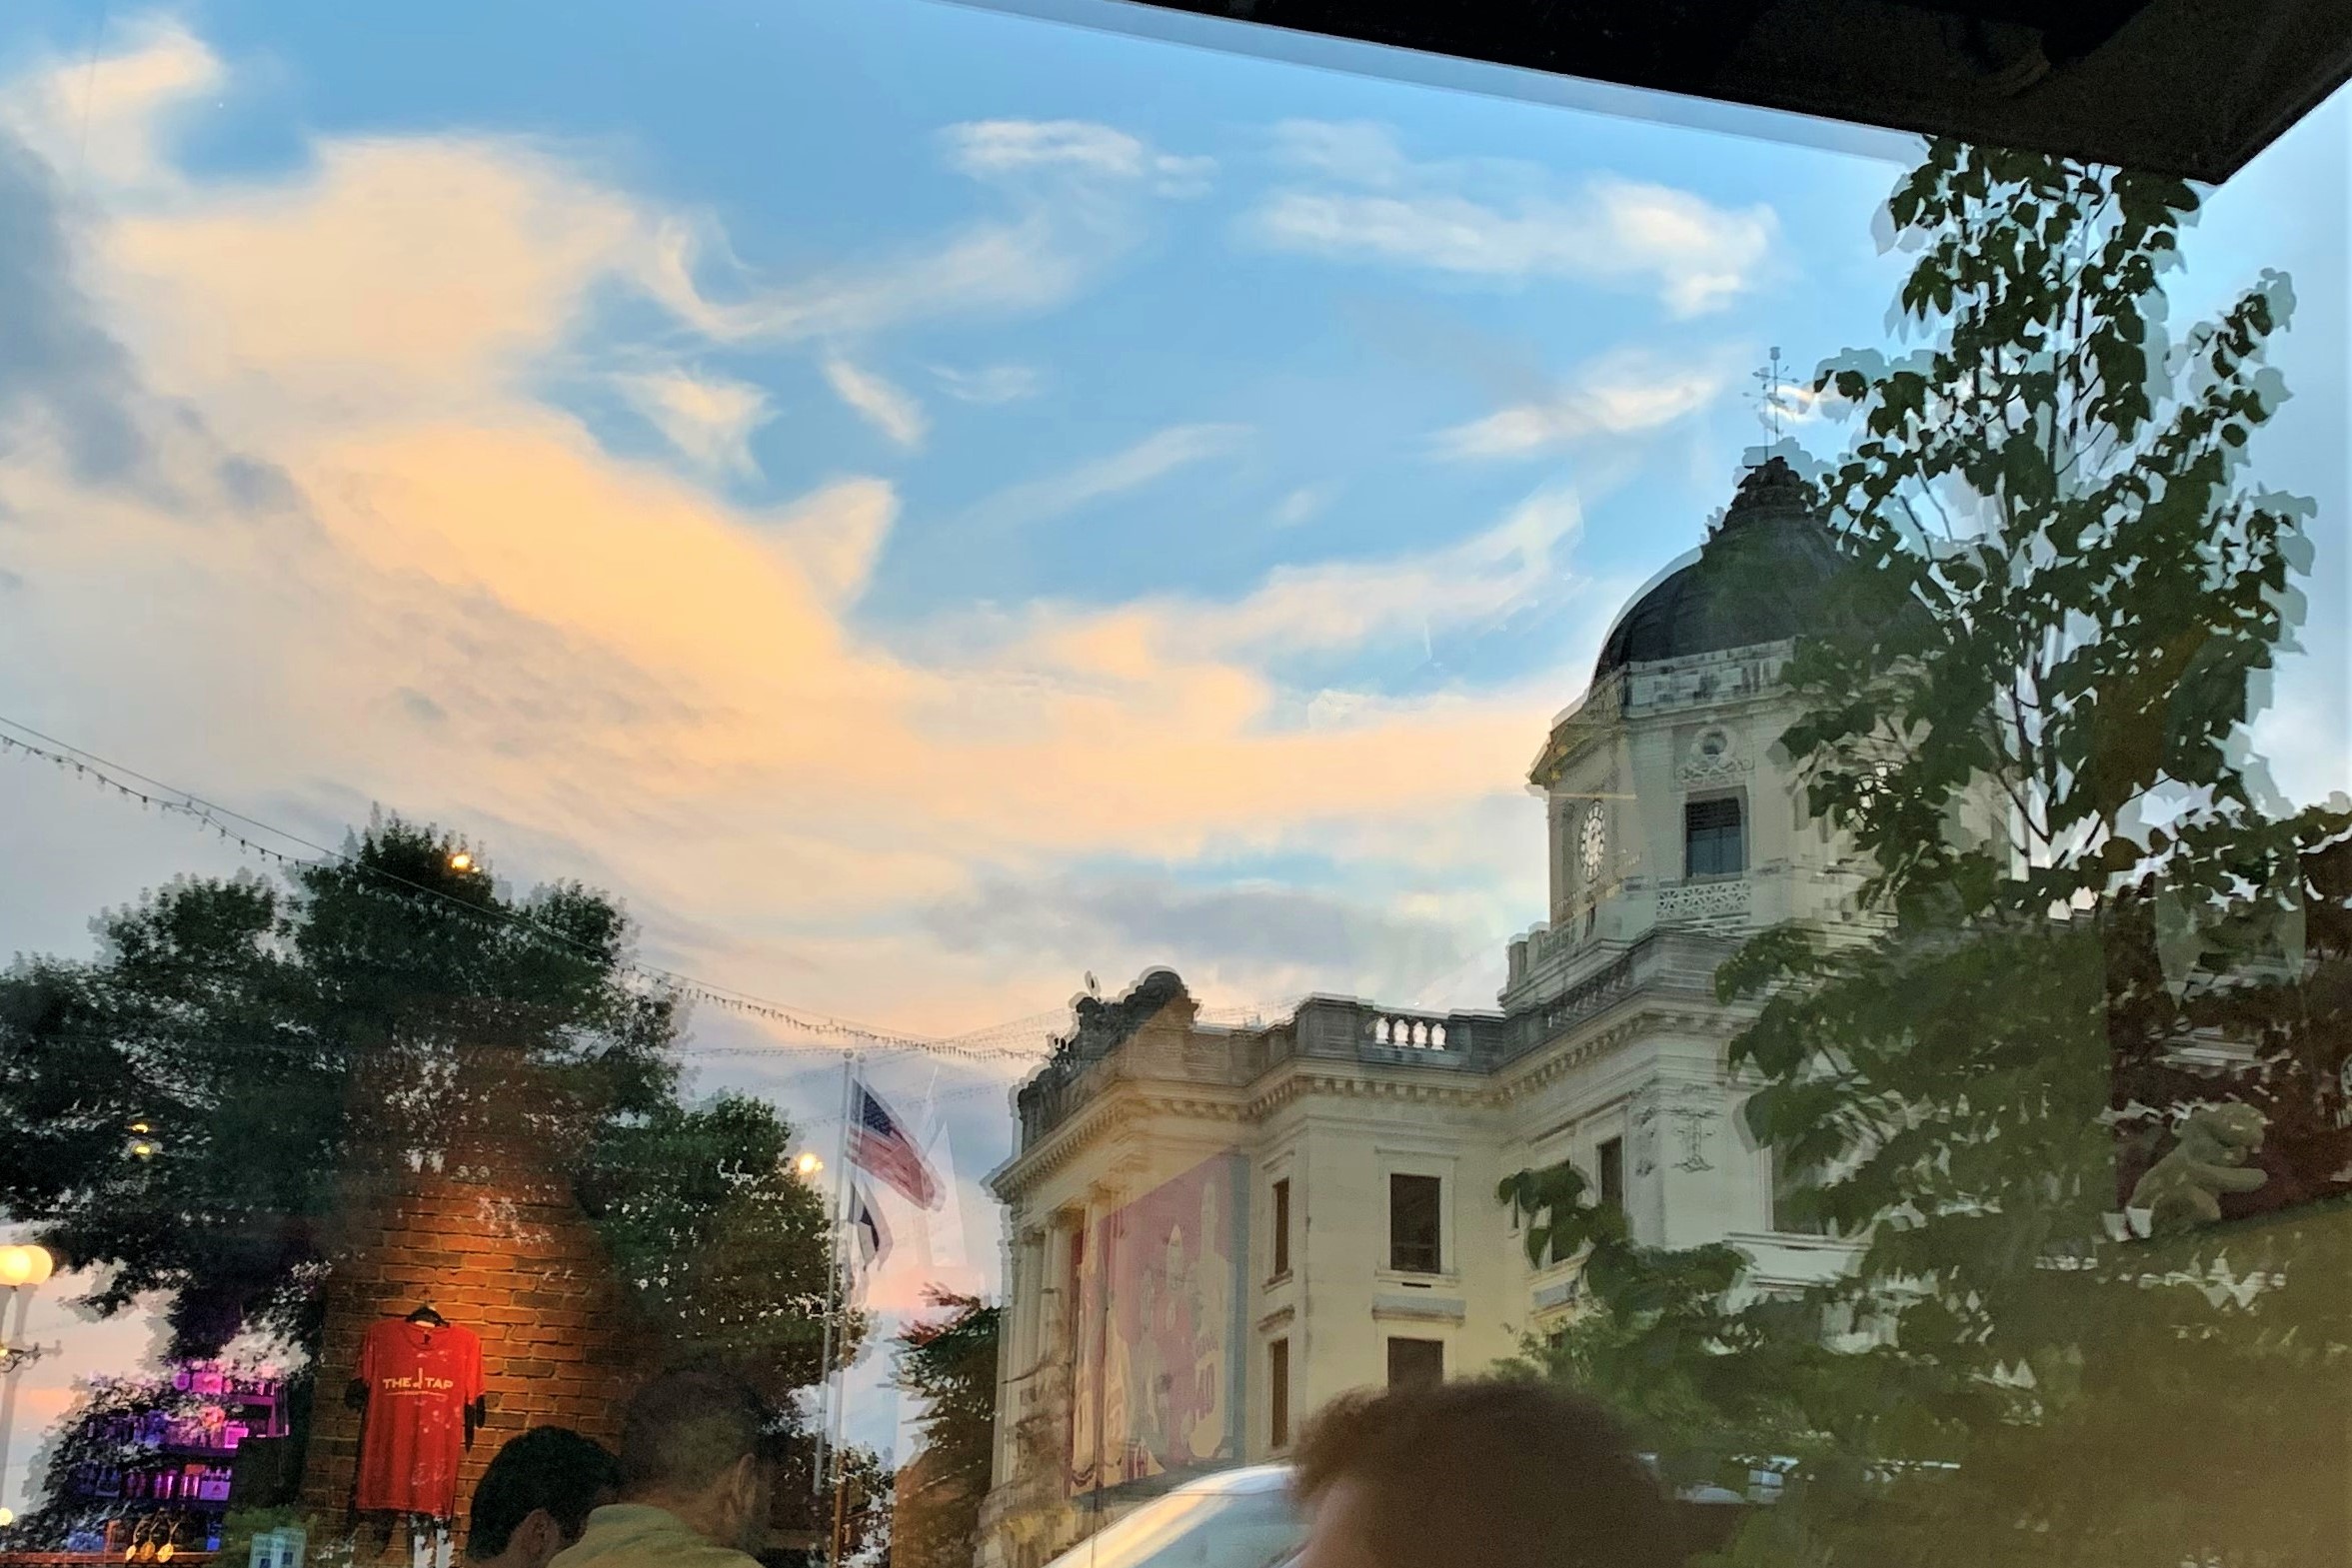 File: A reflection of the Monroe County Courthouse in the window of a downtown Bloomington business.